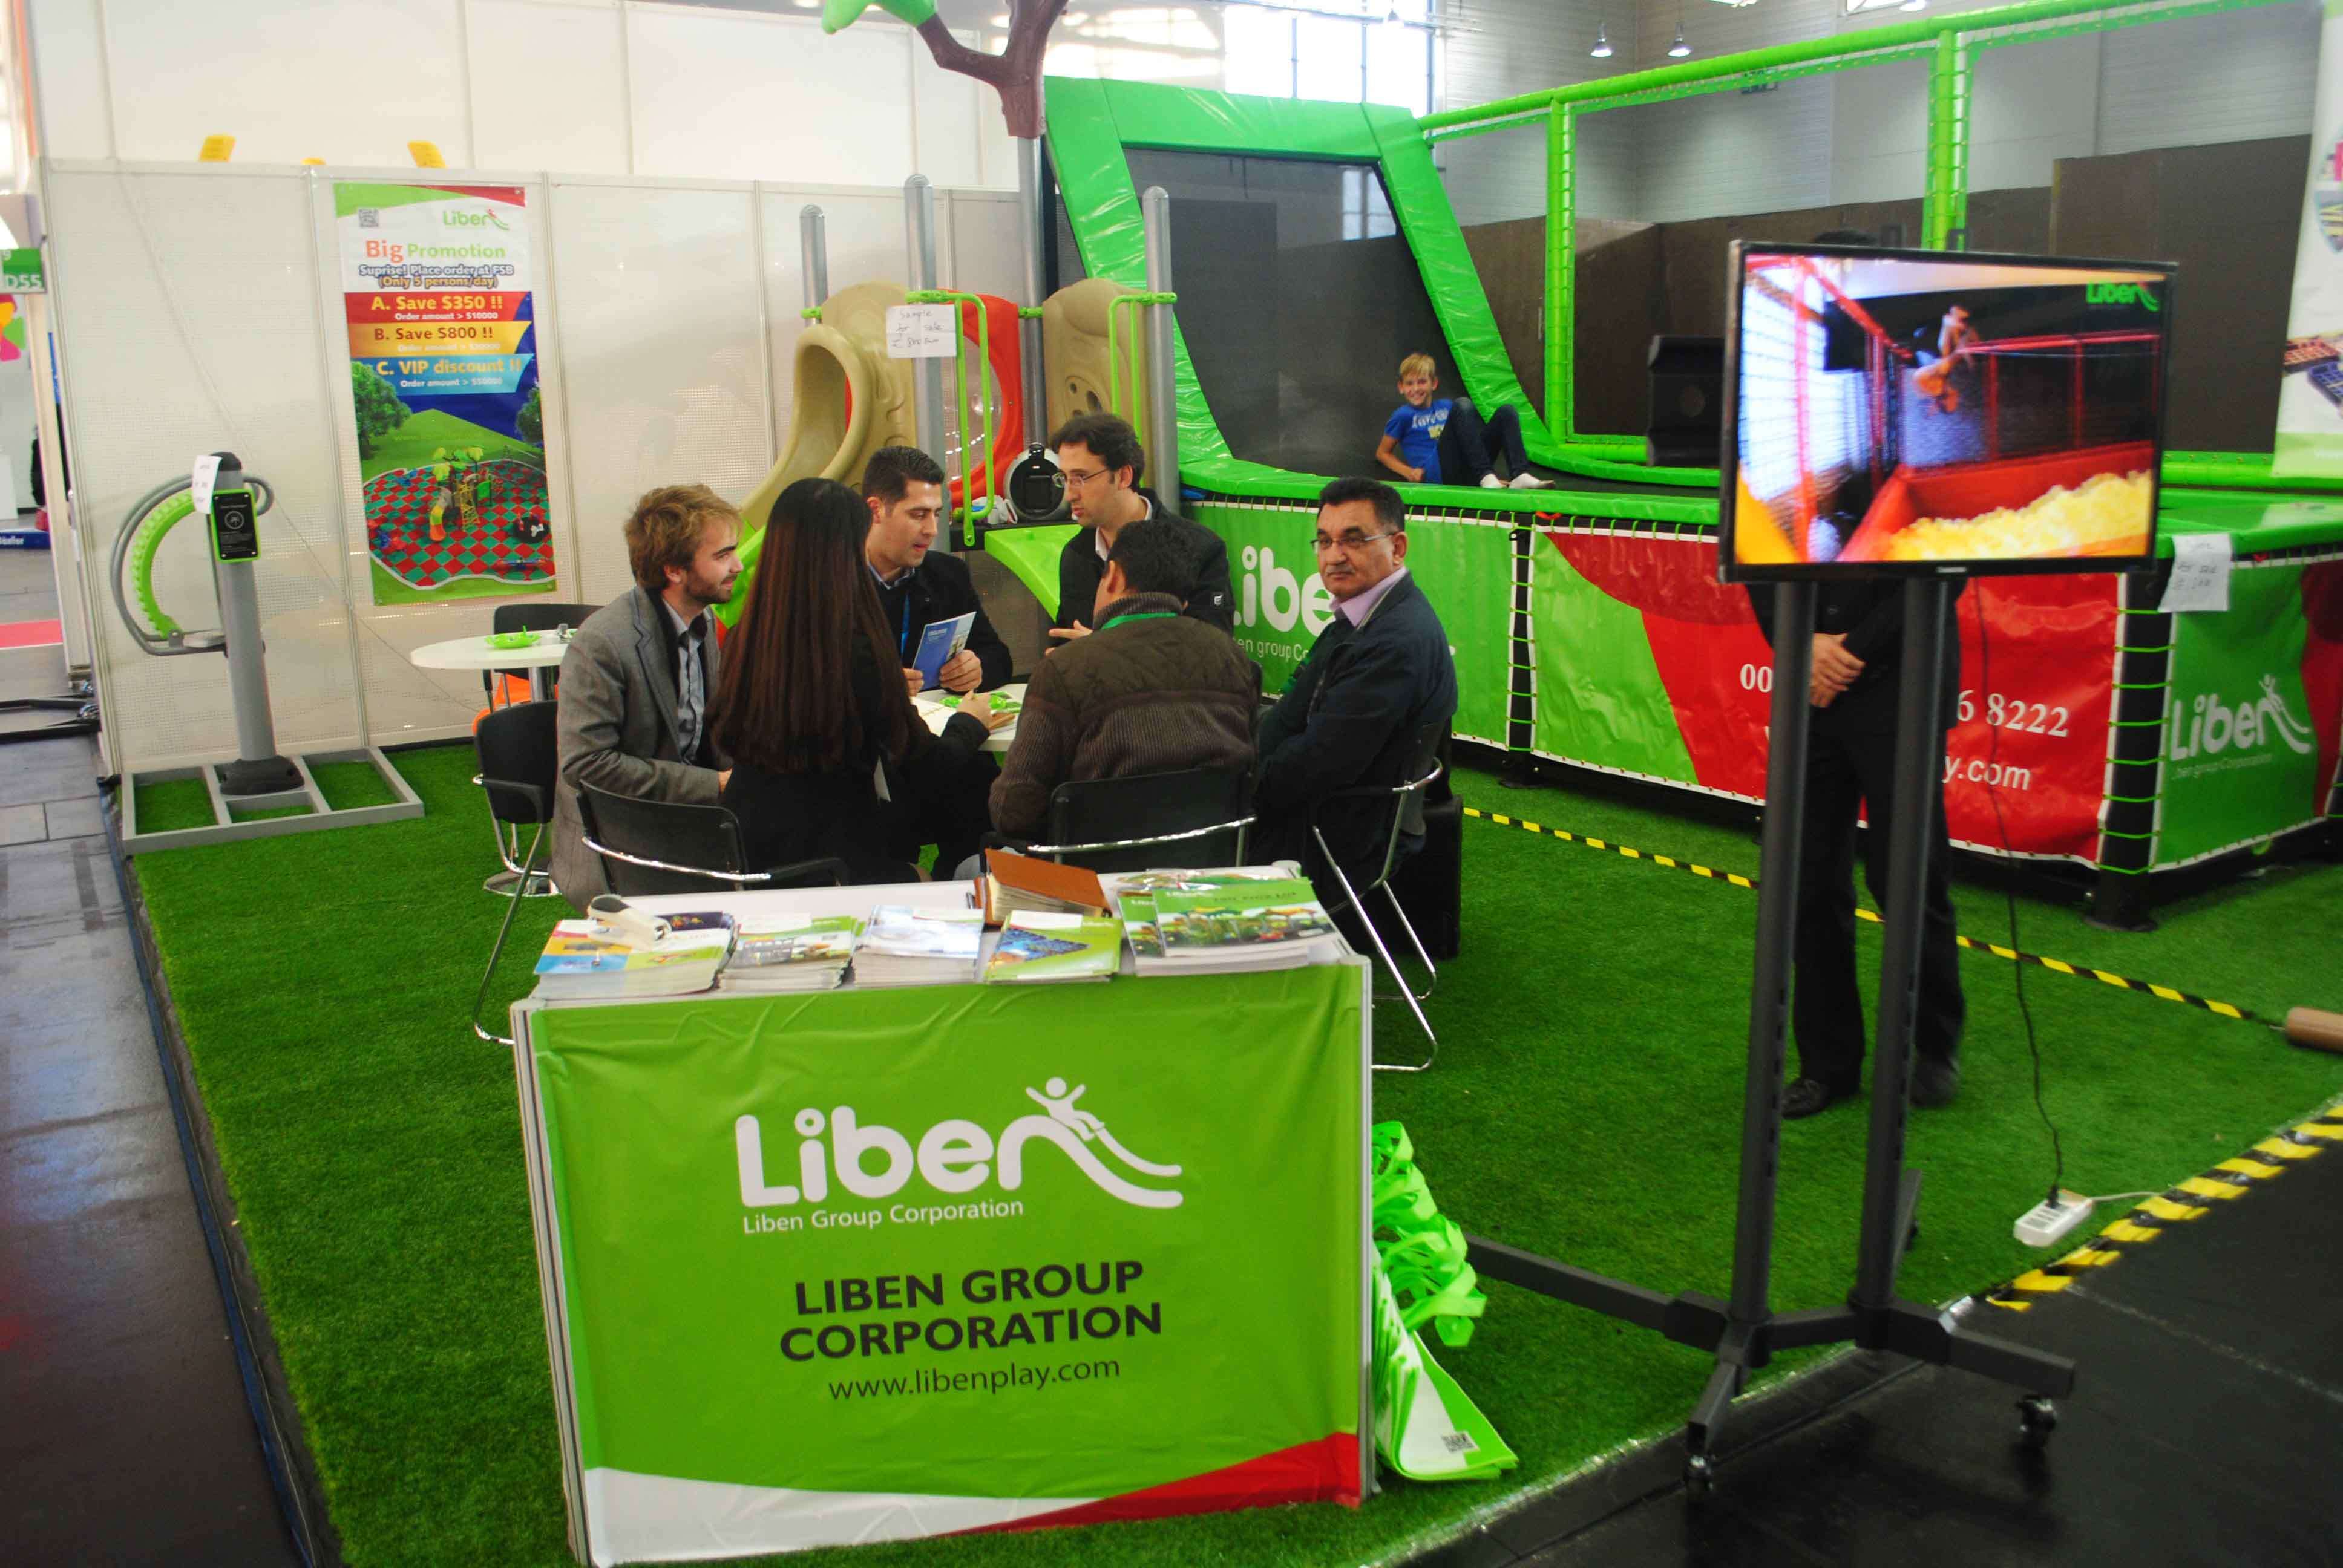 Liben Group Corporation attend 2015 FSB Trade Fair in Cologne, Germany